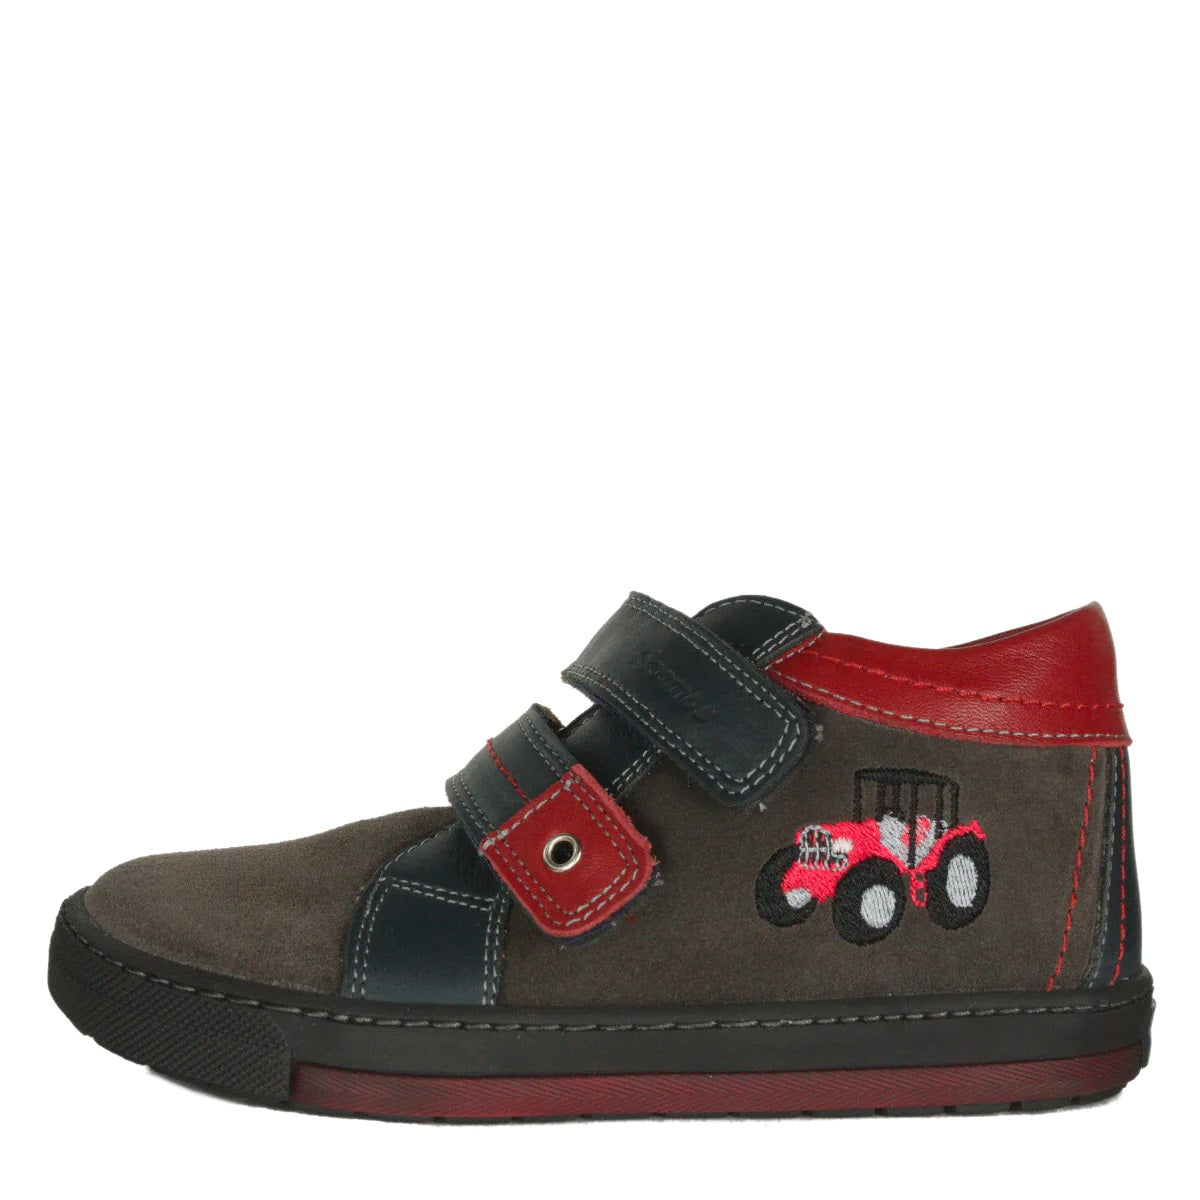 Szamos kid boy sneakers dark brown with red tractor decor little kid/big kid size